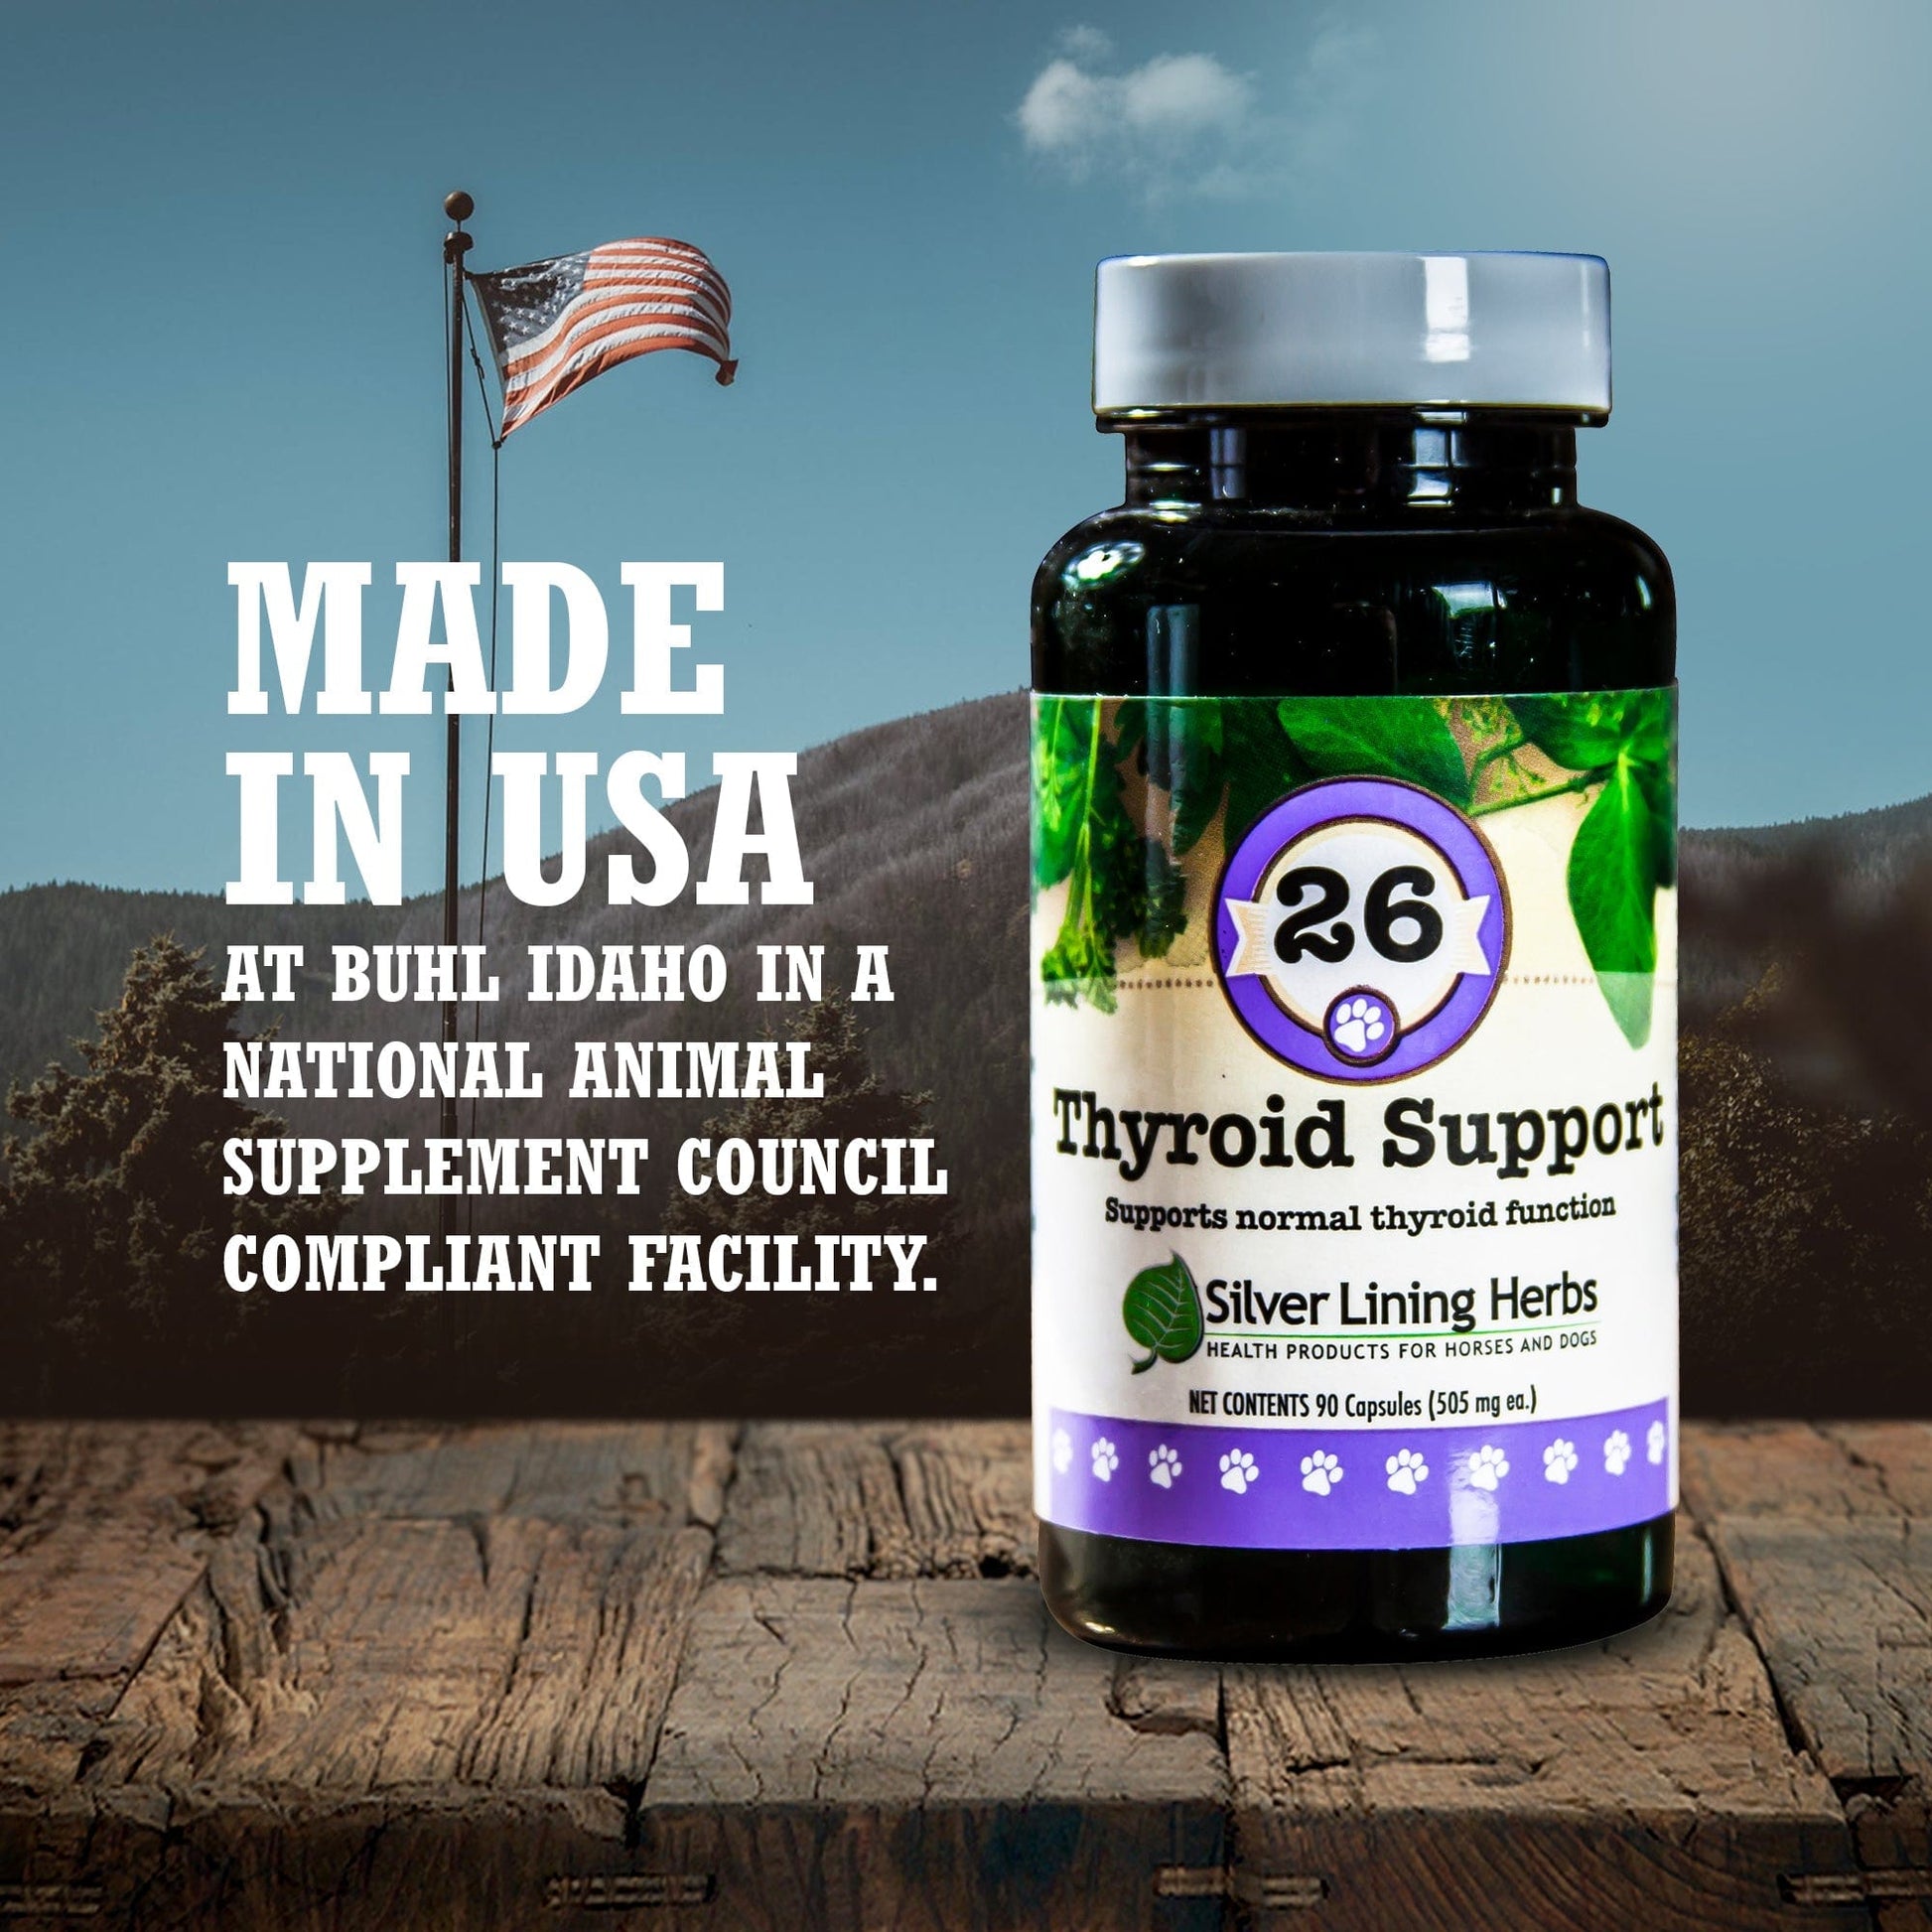 A bottle of #26 Thyroid Support for Dogs and text saying it was made in Buhl, Idaho, USA